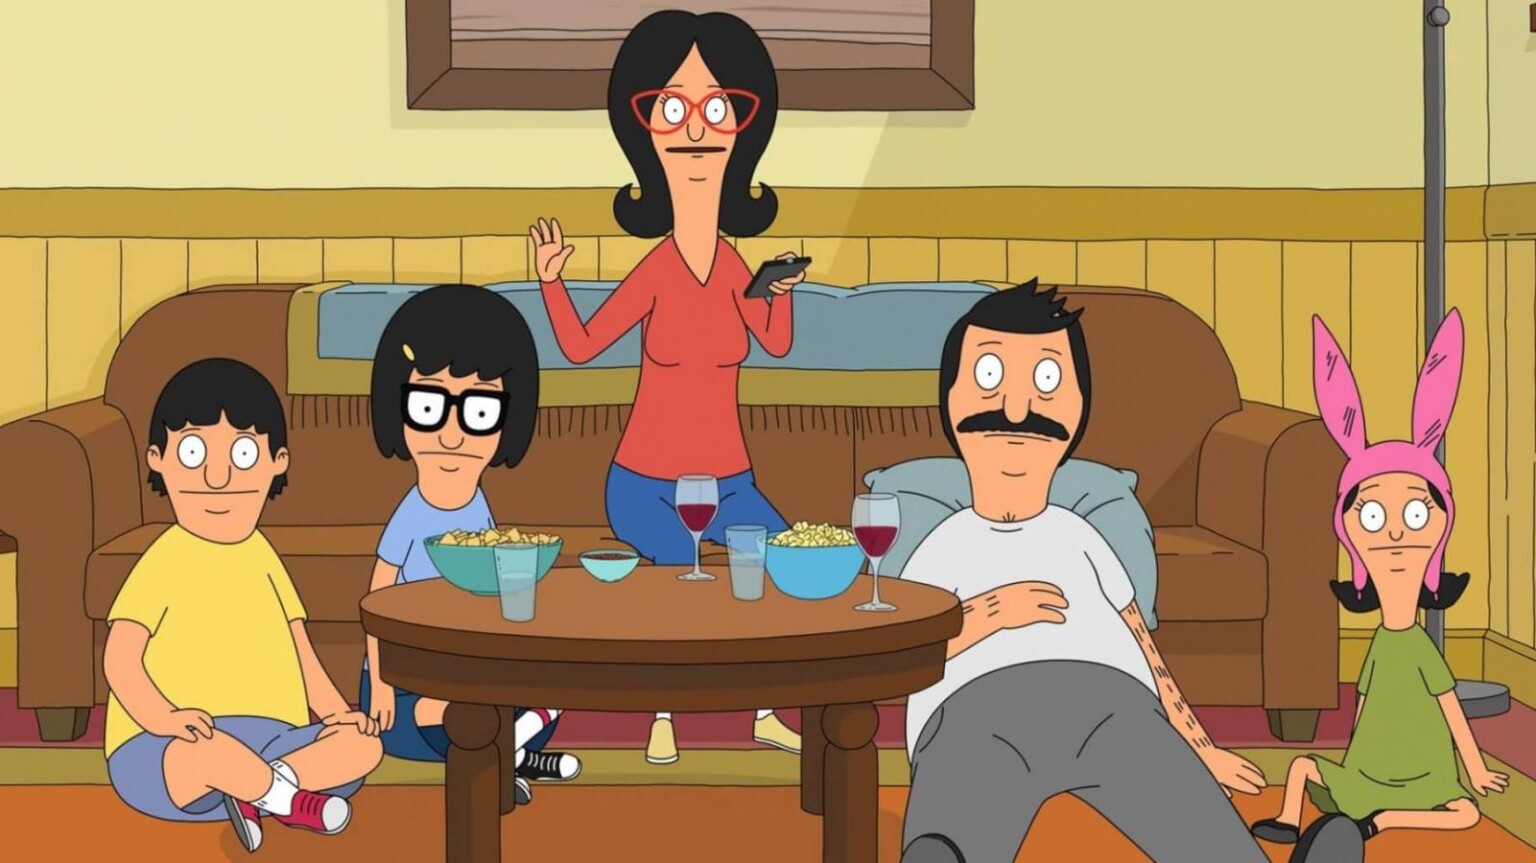 How to Watch 'Bob's Burgers' Online - Live Stream Season 10 Episodes